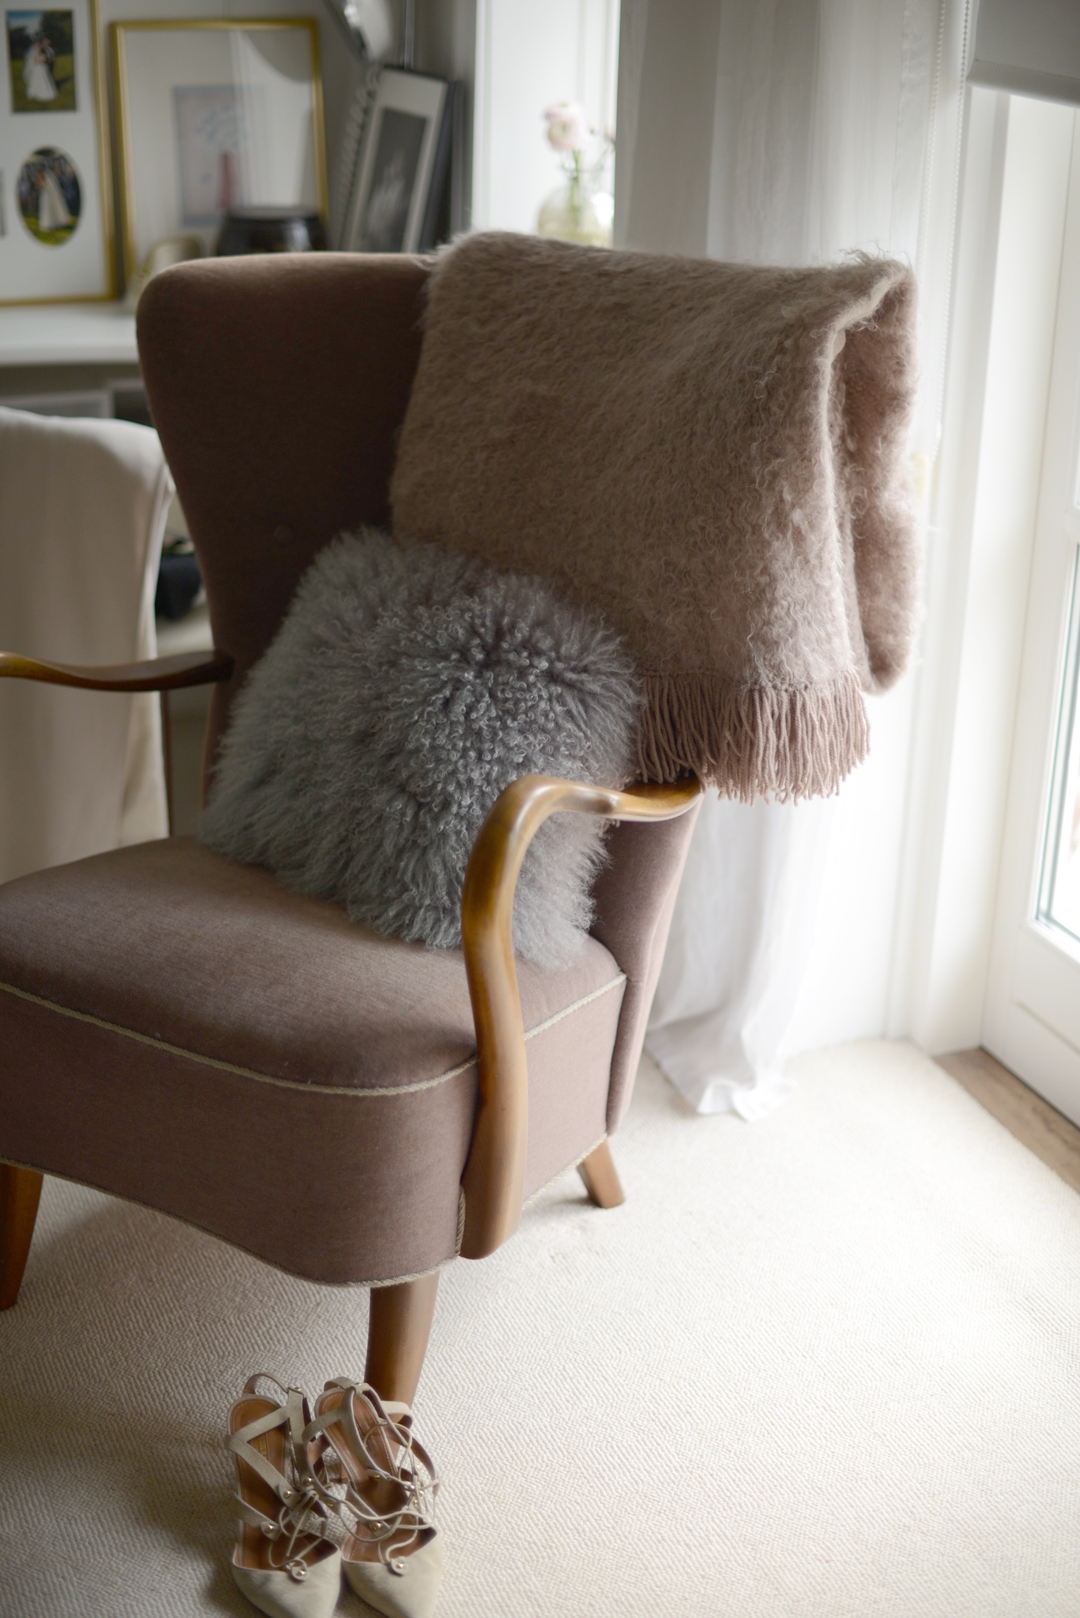 Scandi interior inspo with Kirsten MacDonald photographed by sara delaney